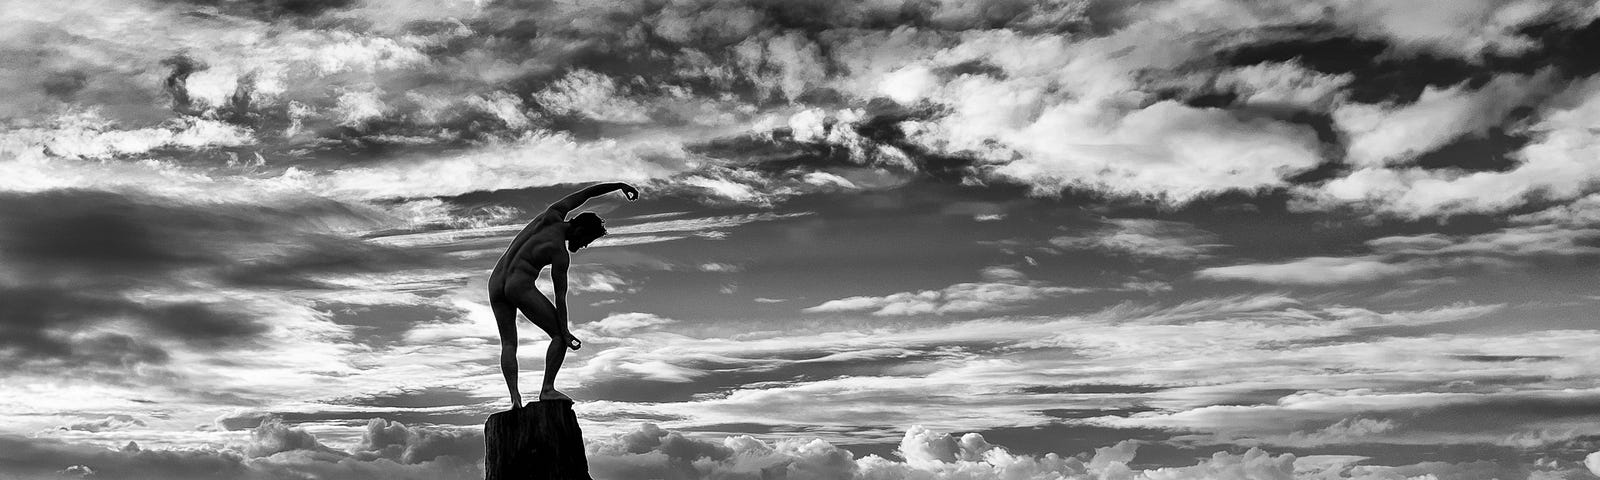 A nude man stands on a tree stump on the beach, the Pacific Ocean behind him with an amazing array of spotted and dramatic clouds filling the sky while he balances in a yoga’esque pose.